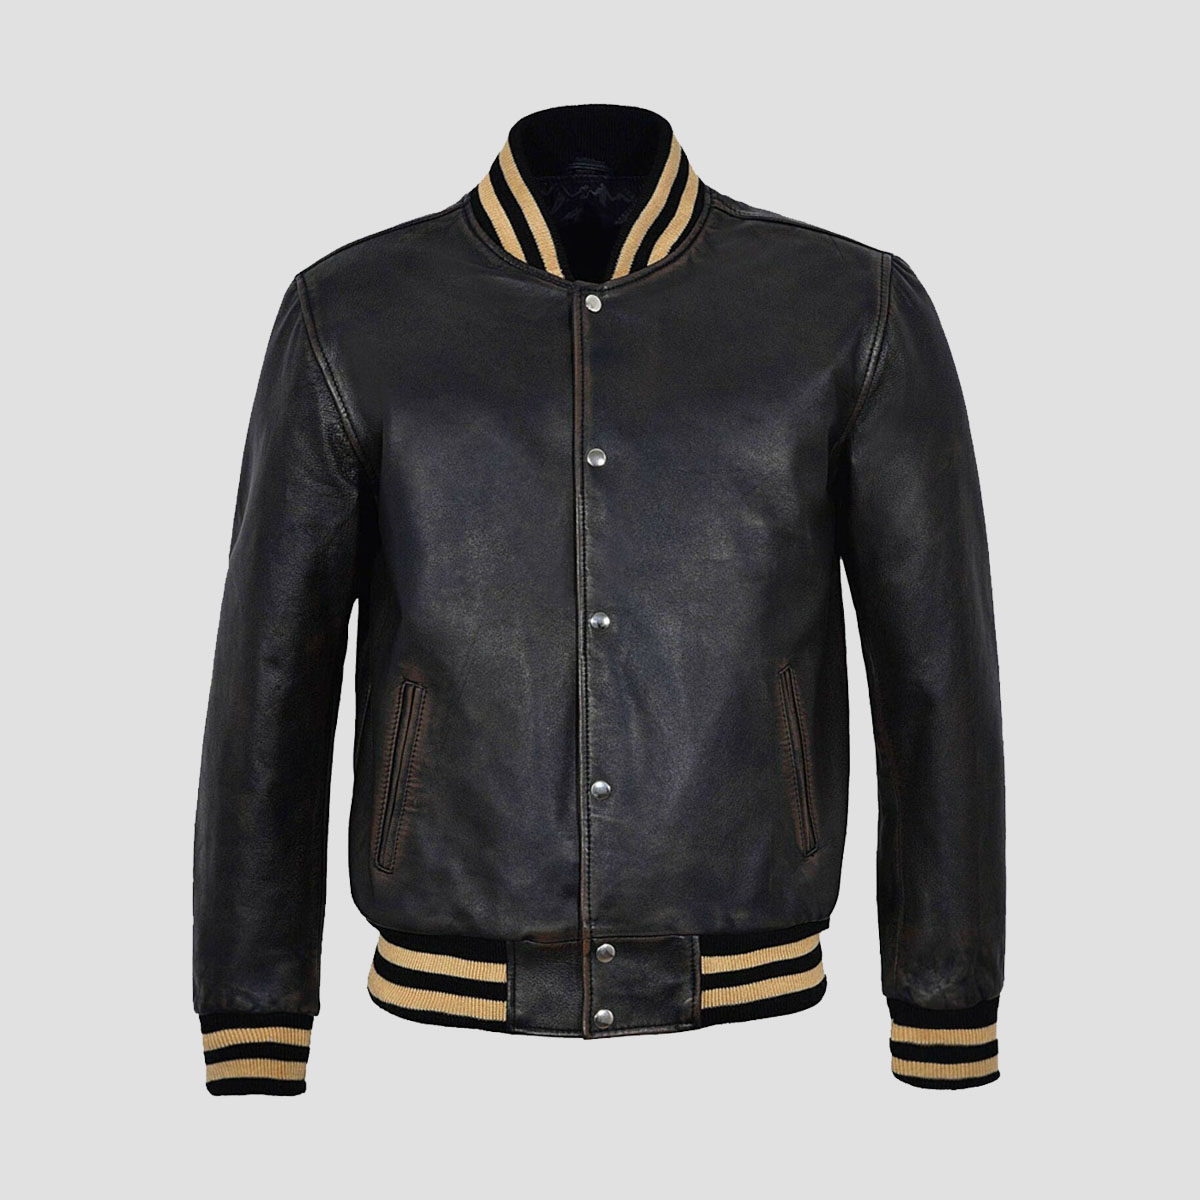 Unisex Leather Bomber Jacket Please Look More Styles for Sale in Everett,  WA - OfferUp